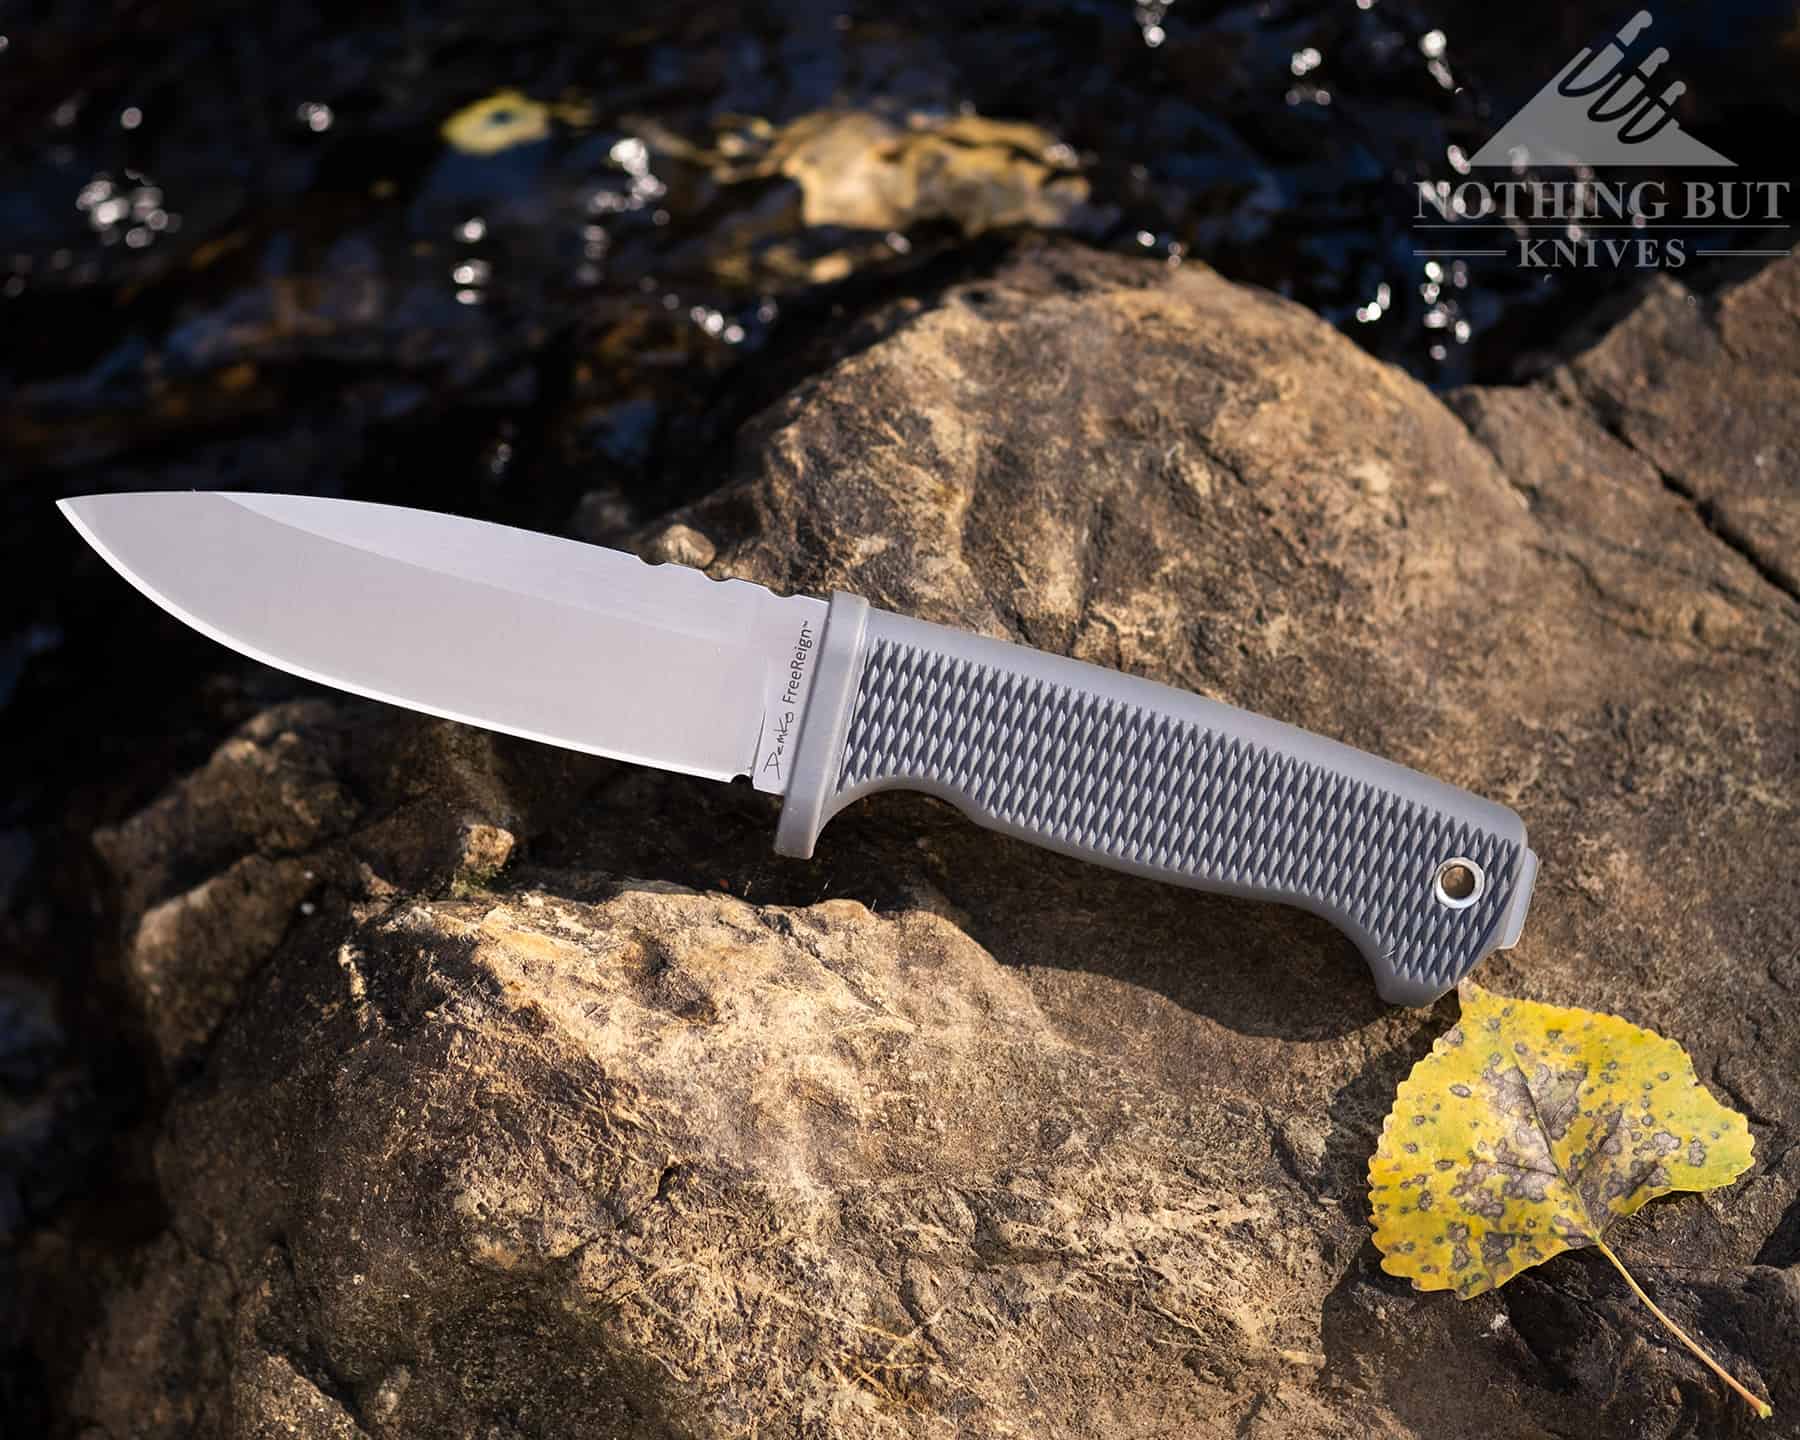 The Demko FreeReign is a great option for anyone who wants a comfortable bushcraft otr survival knife with a versatile sheath.